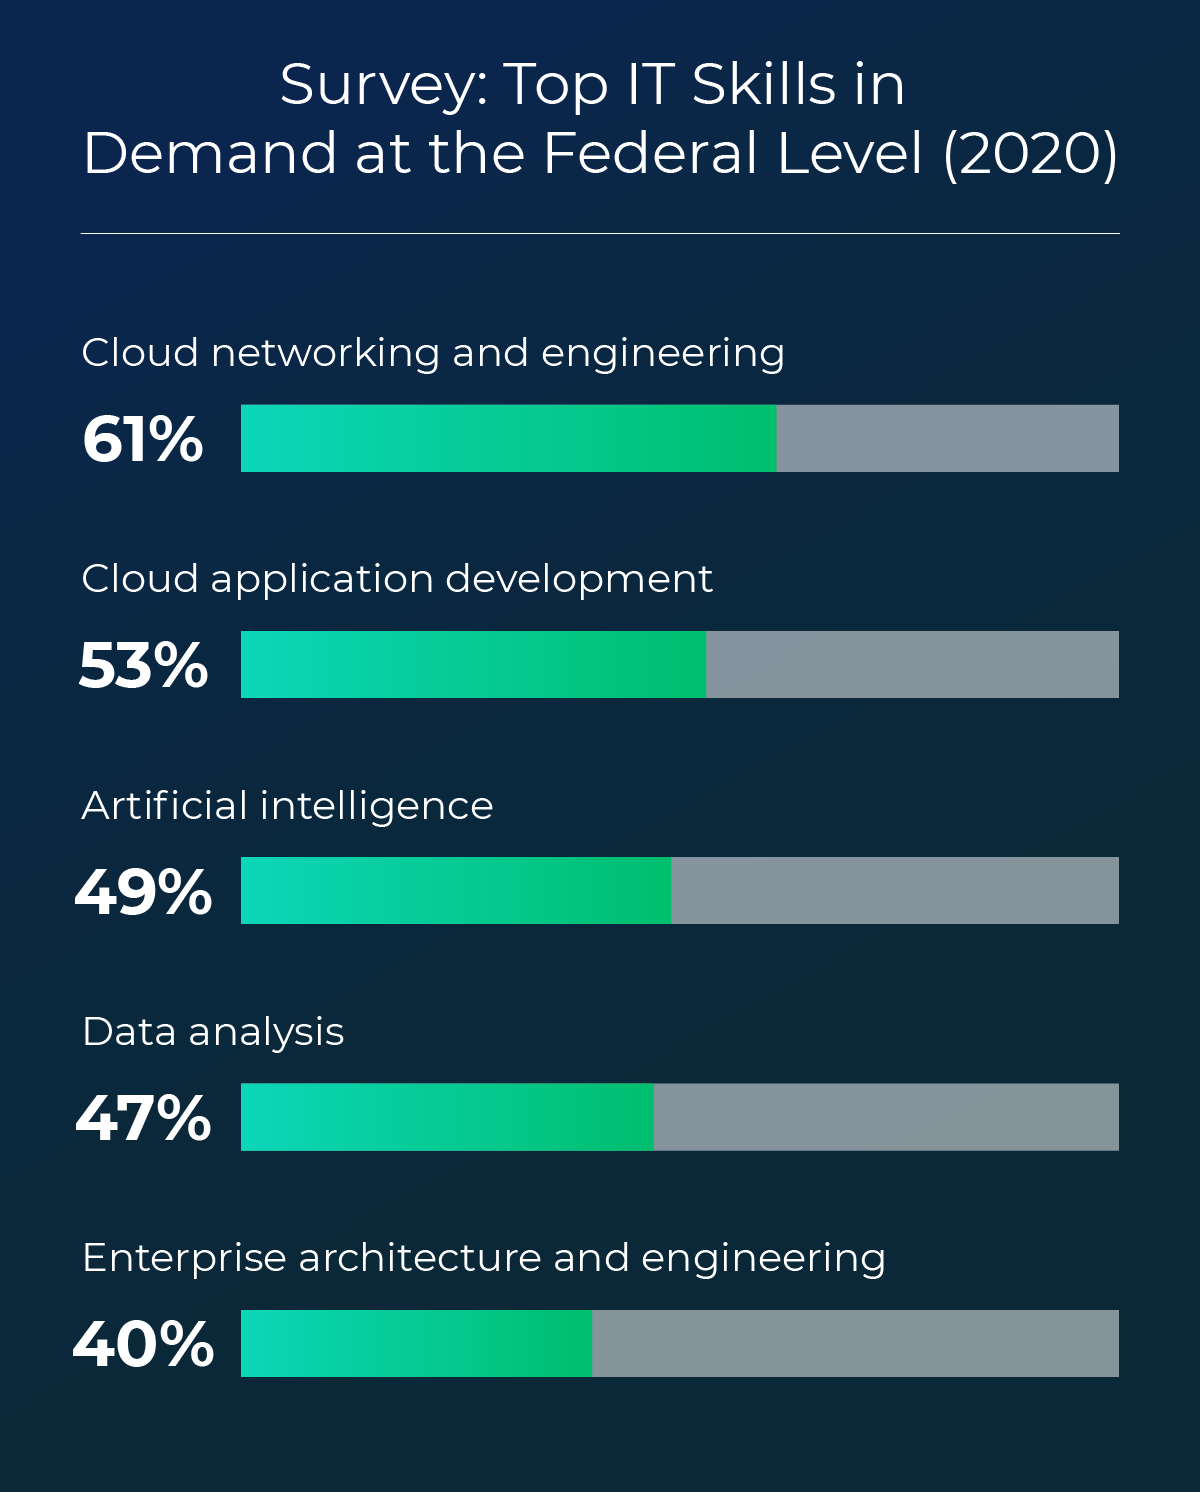 Graphic showing the top five IT skills in demand among federal government employees